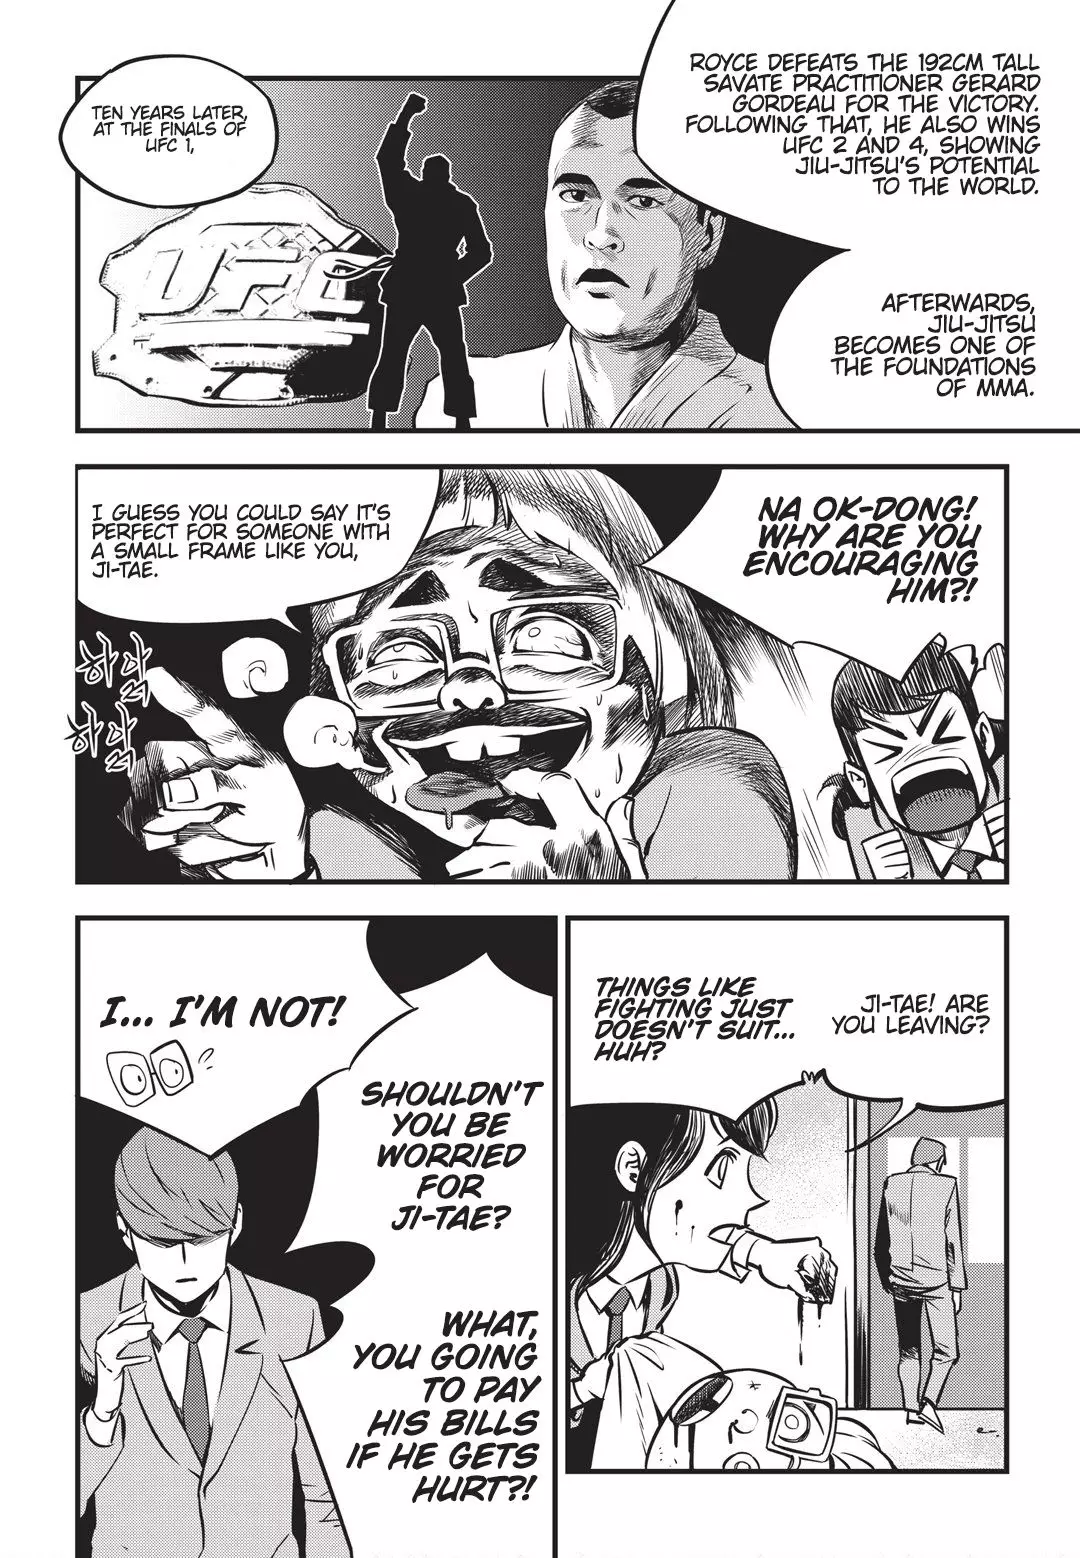 Fight Class 3 - 2 page 027